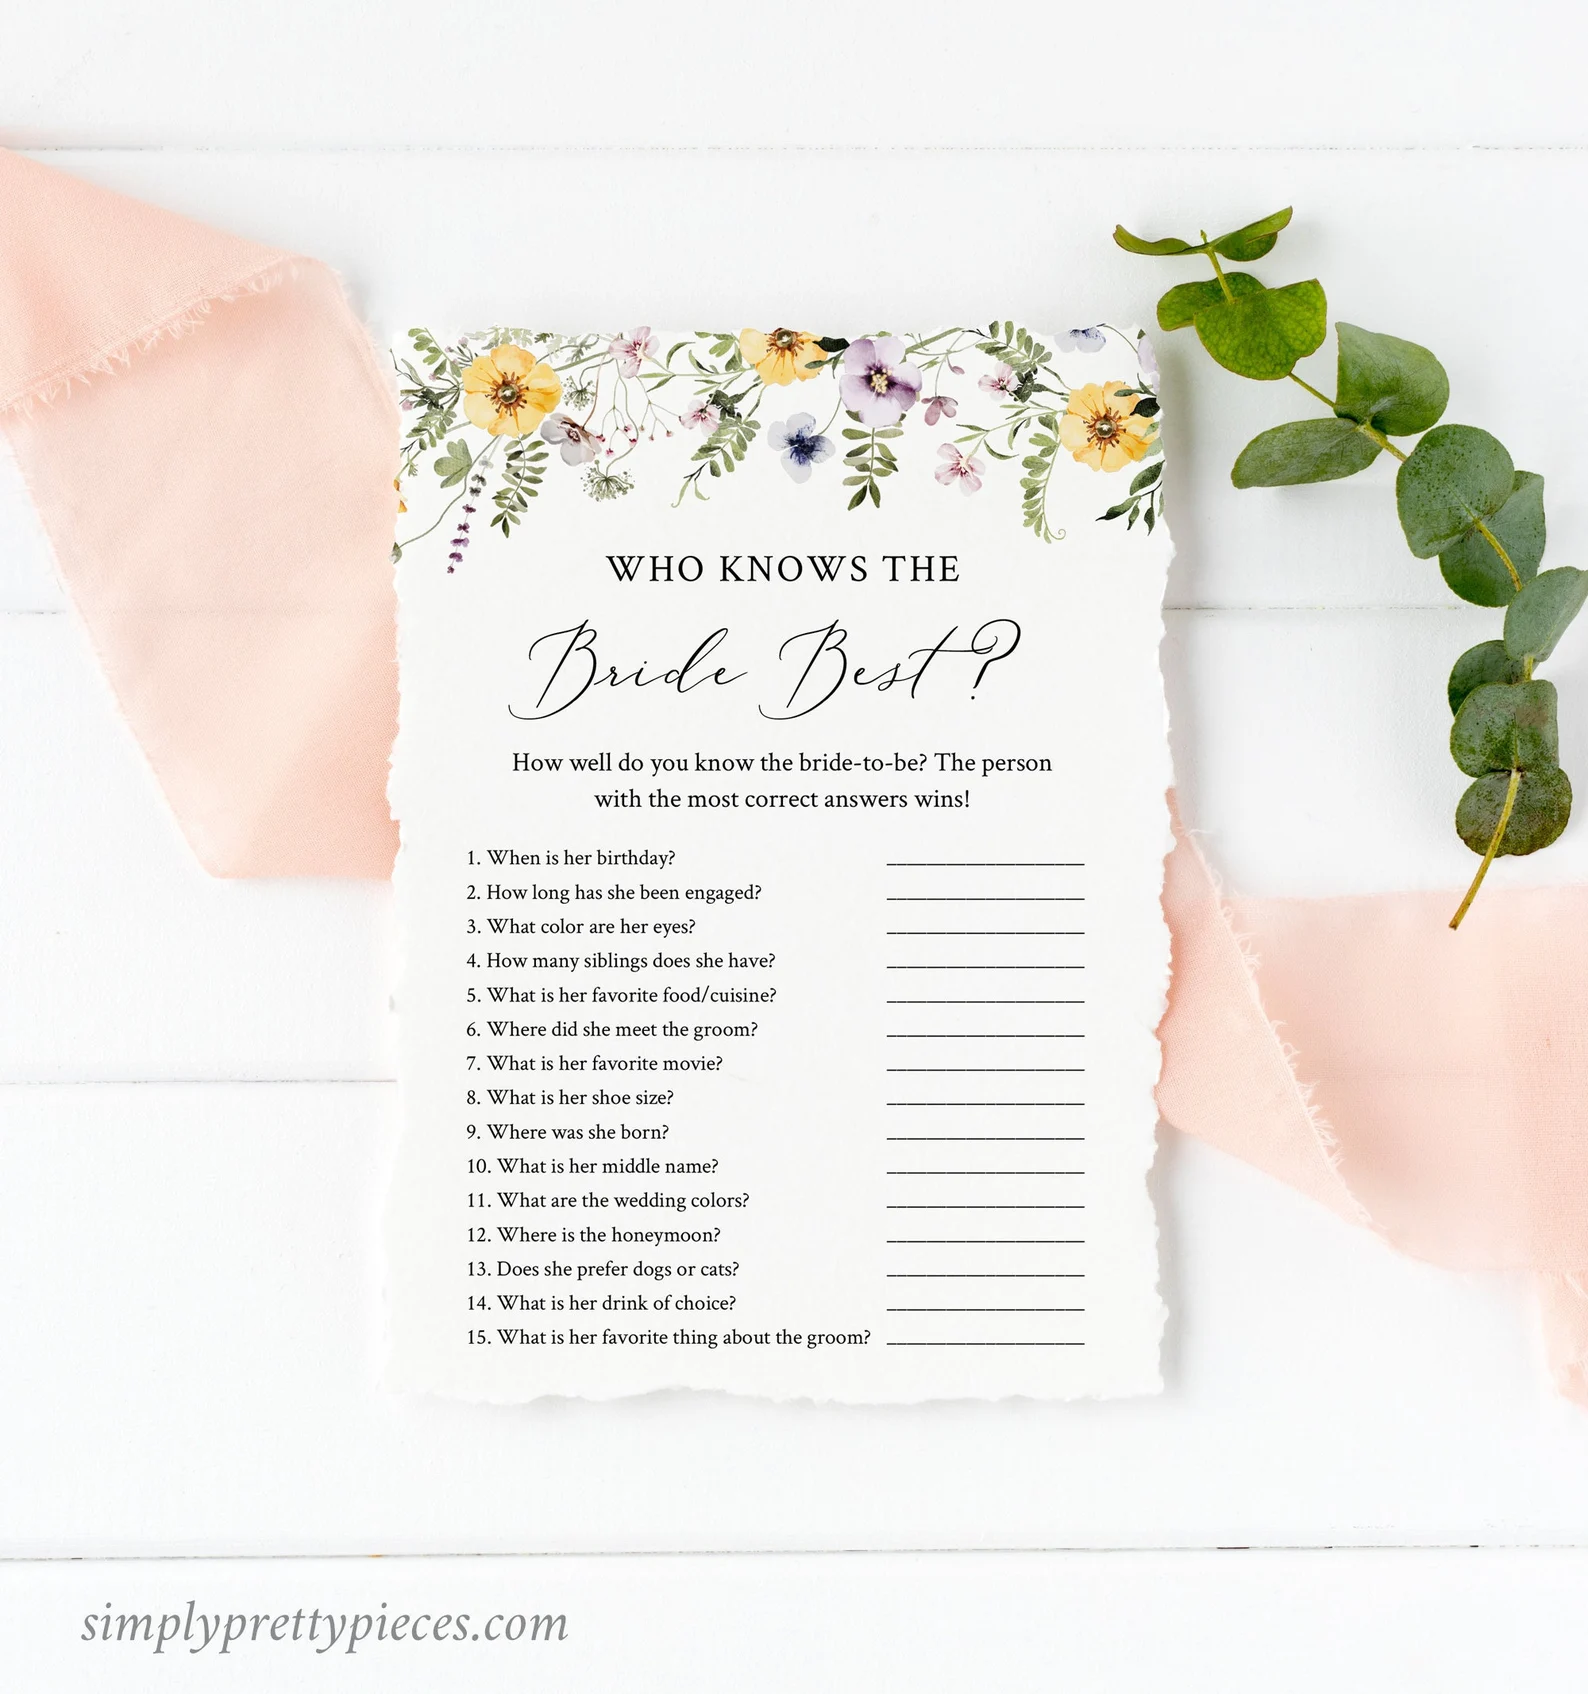 Wildflower Editable Who Knows the Bride Best Bridal Show Game